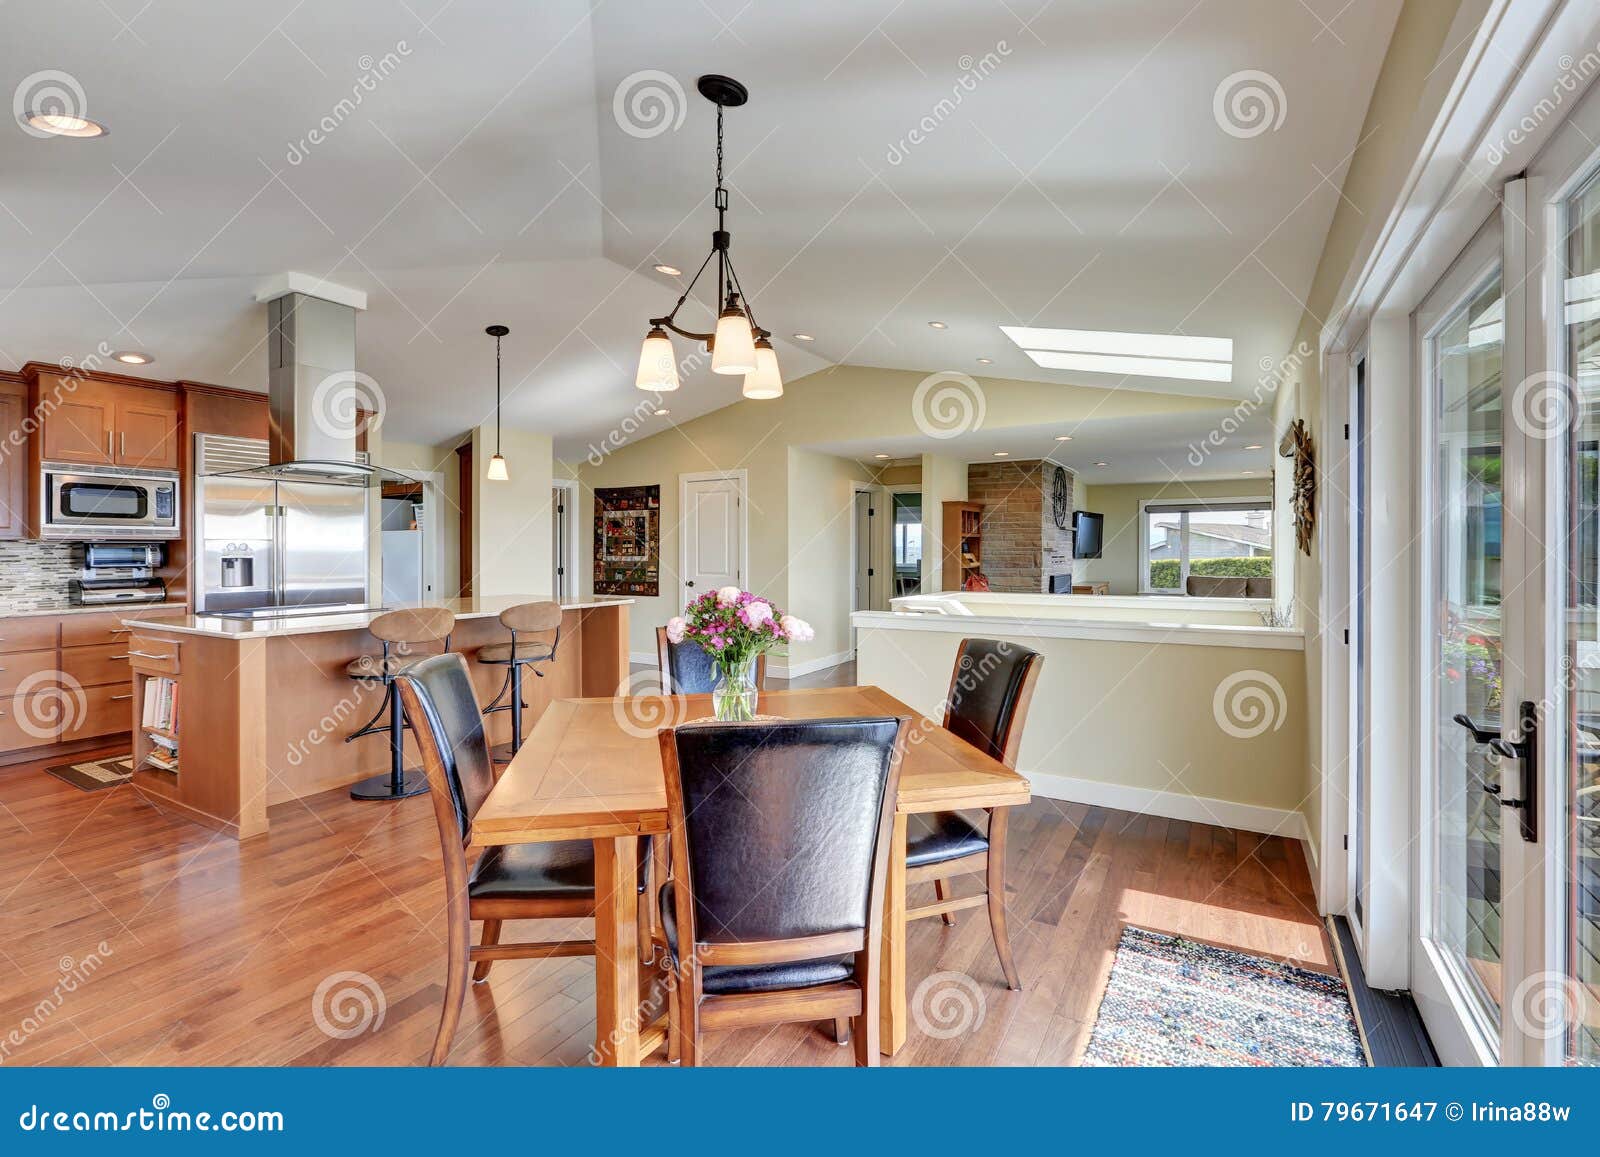 Luxury House Interior With Open Floor Plan Stock Image Image Of